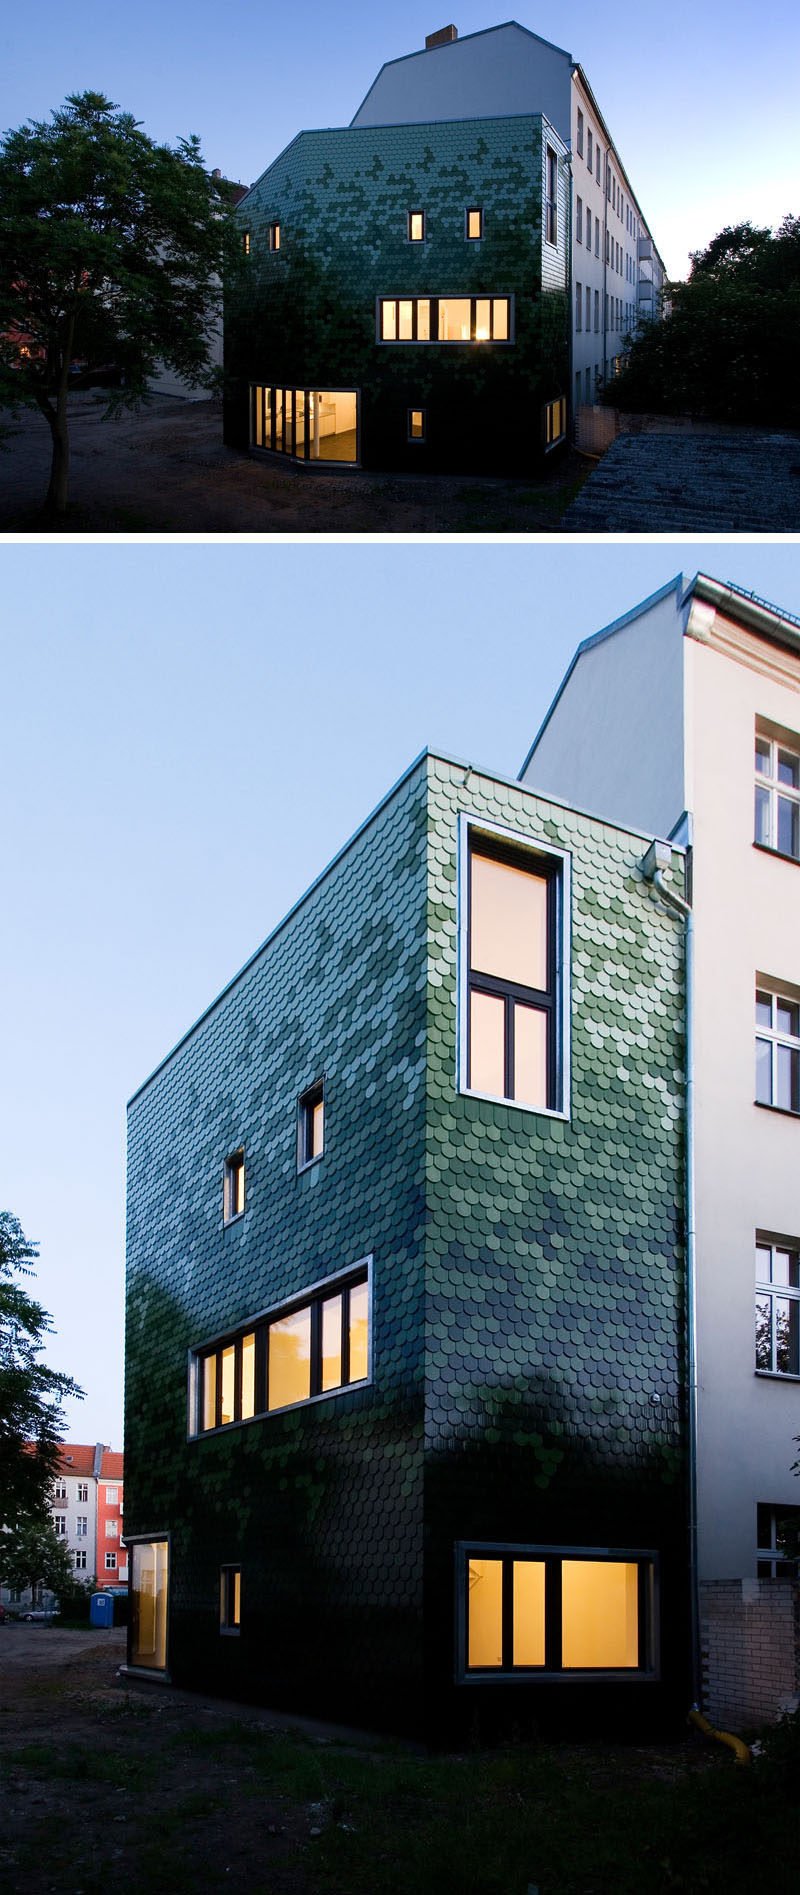 House Siding Idea - Multiple Shades Of Green Shingles Cover This Building In Berlin